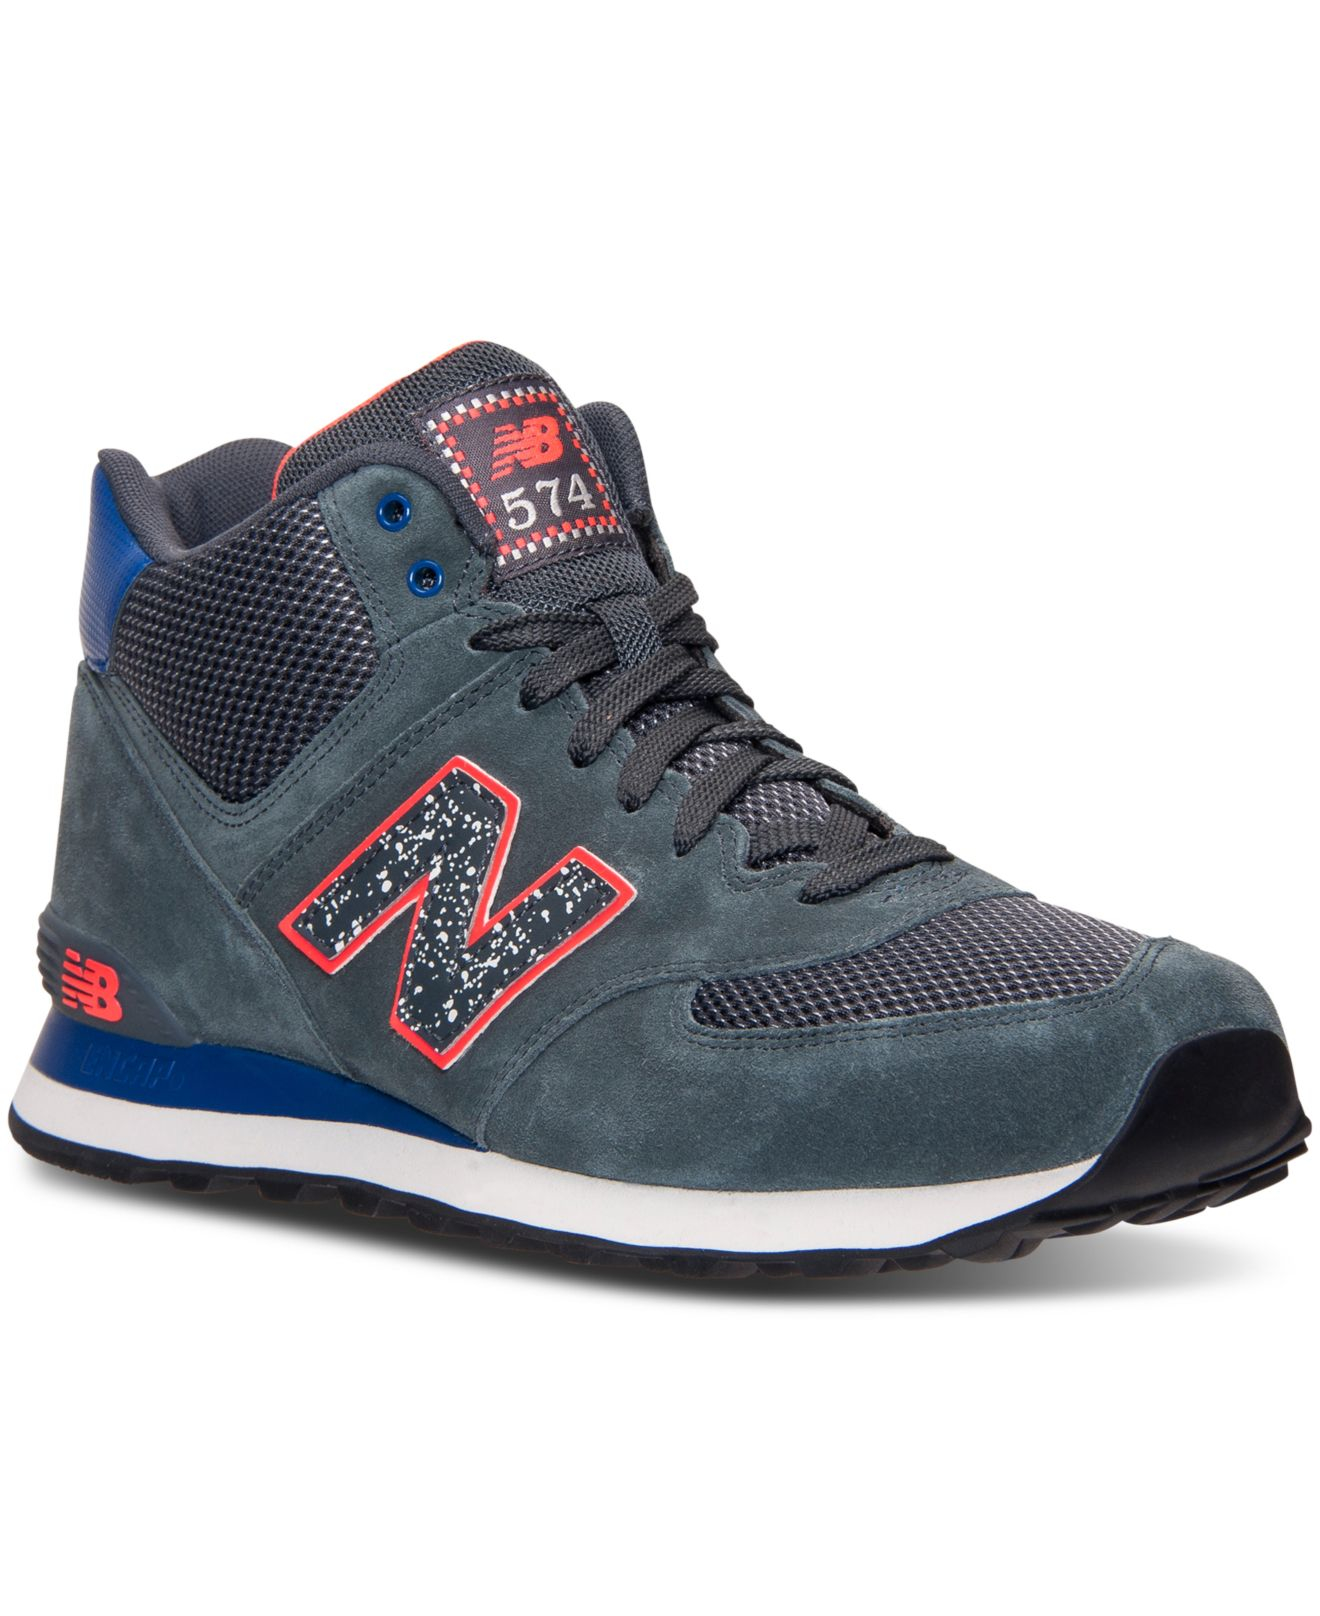 New Balance Men's 574 Mid Casual Sneakers From Finish Line in Grey/Blue